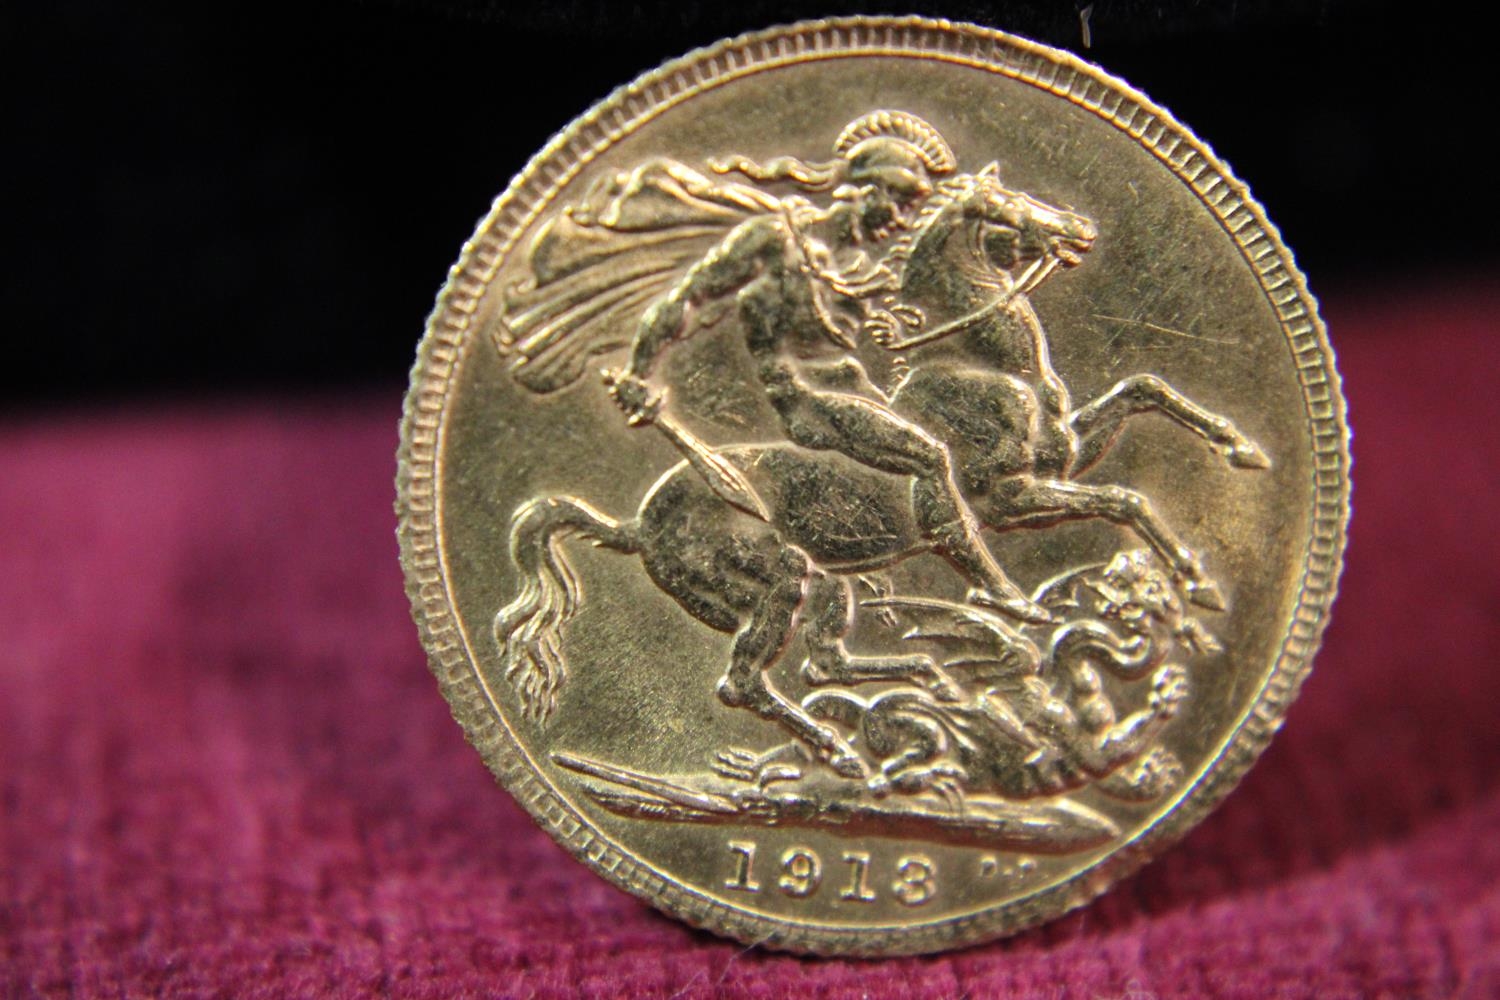 A 1913 22ct gold full sovereign